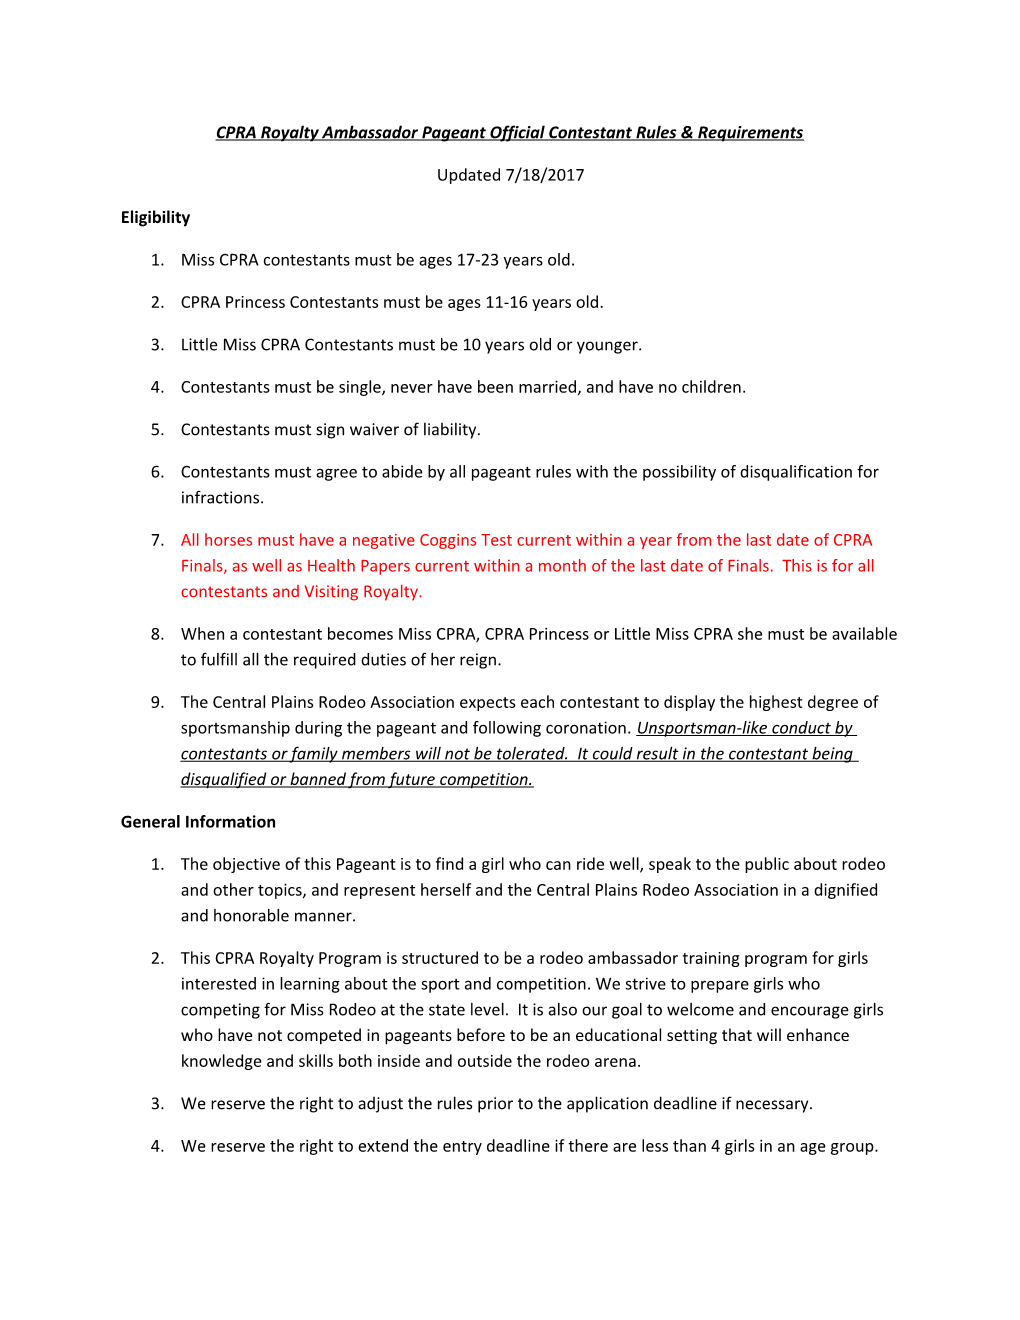 CPRA Royalty Ambassador Pageant Official Contestant Rules & Requirements